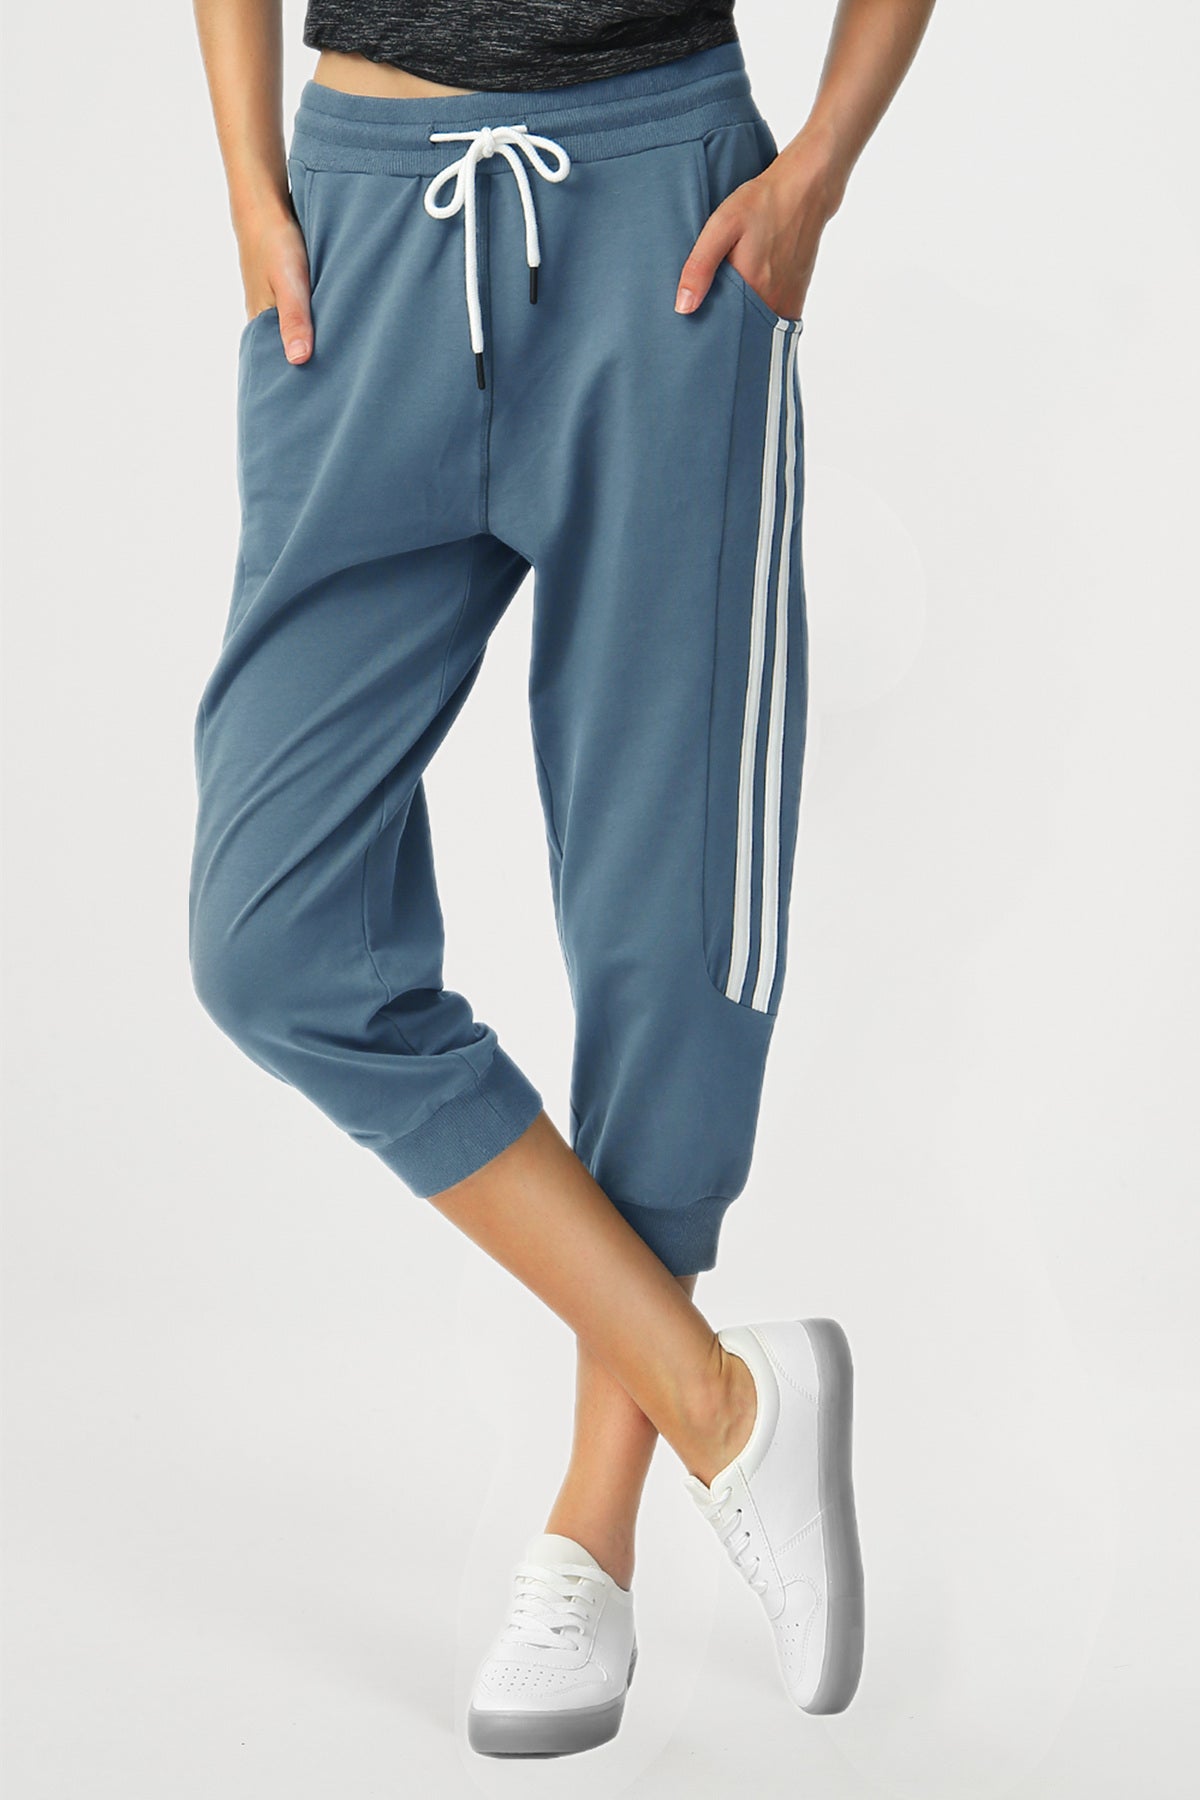 Women's Capri Jogger Sweatpants with Pockets Gym Running Cropped Joggers  Casual – PULI